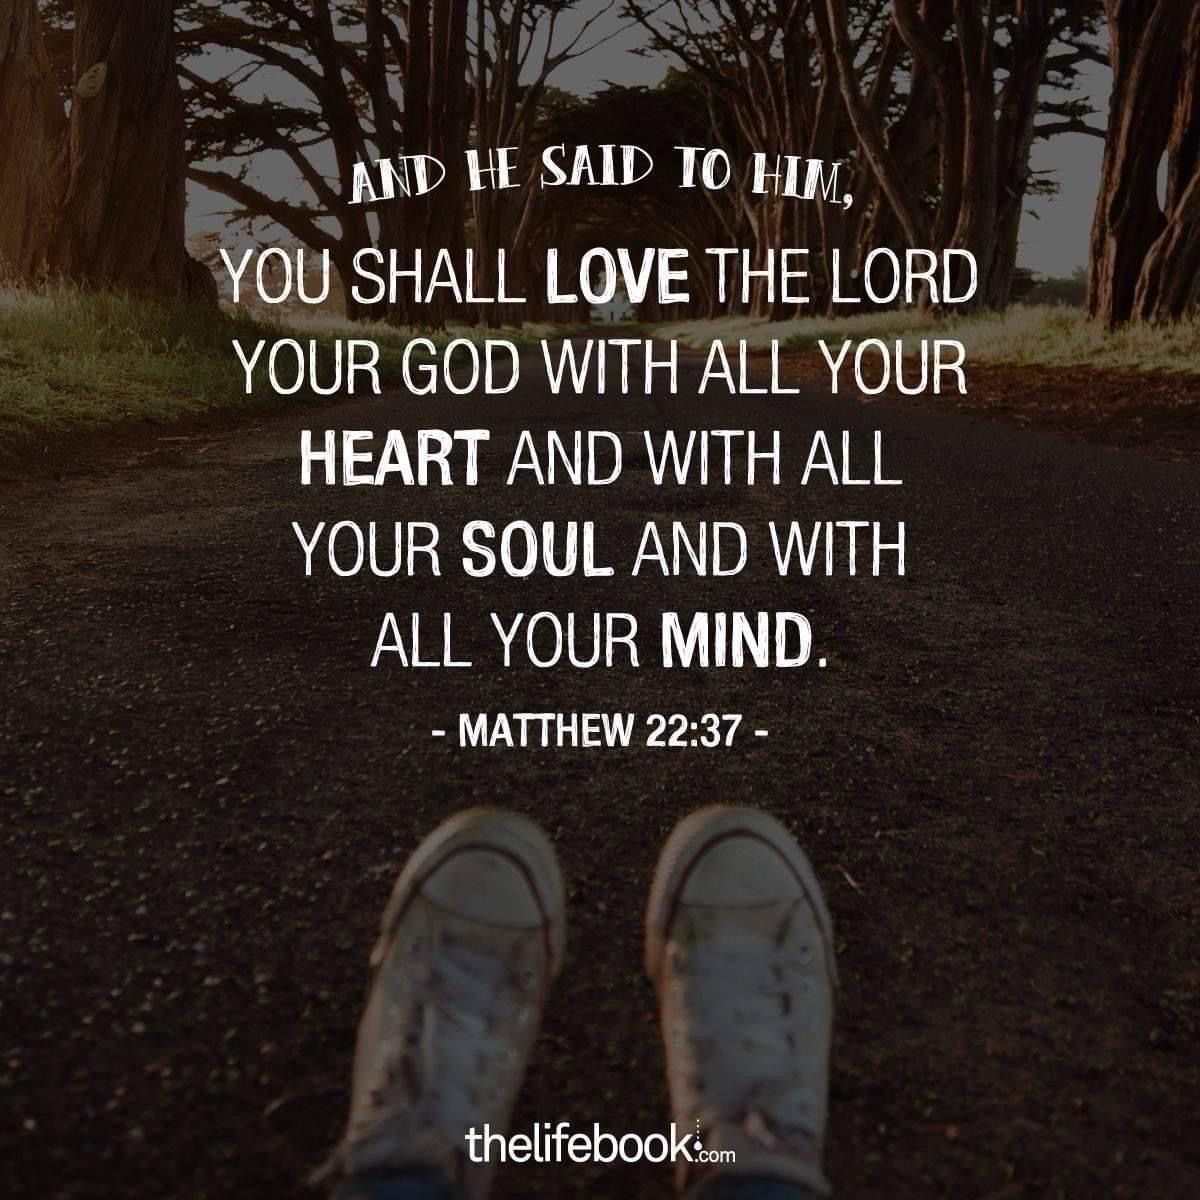 'AND HE SAID ΤΟ HIM, YOU SHALL LOVE THE LORD YOUR GOD WITH ALL YOUR HEART AND WITH ALL YOUR SOUL AND WITH ALL YOUR MIND. -MATTHEW 22:37- thelifebook.com'